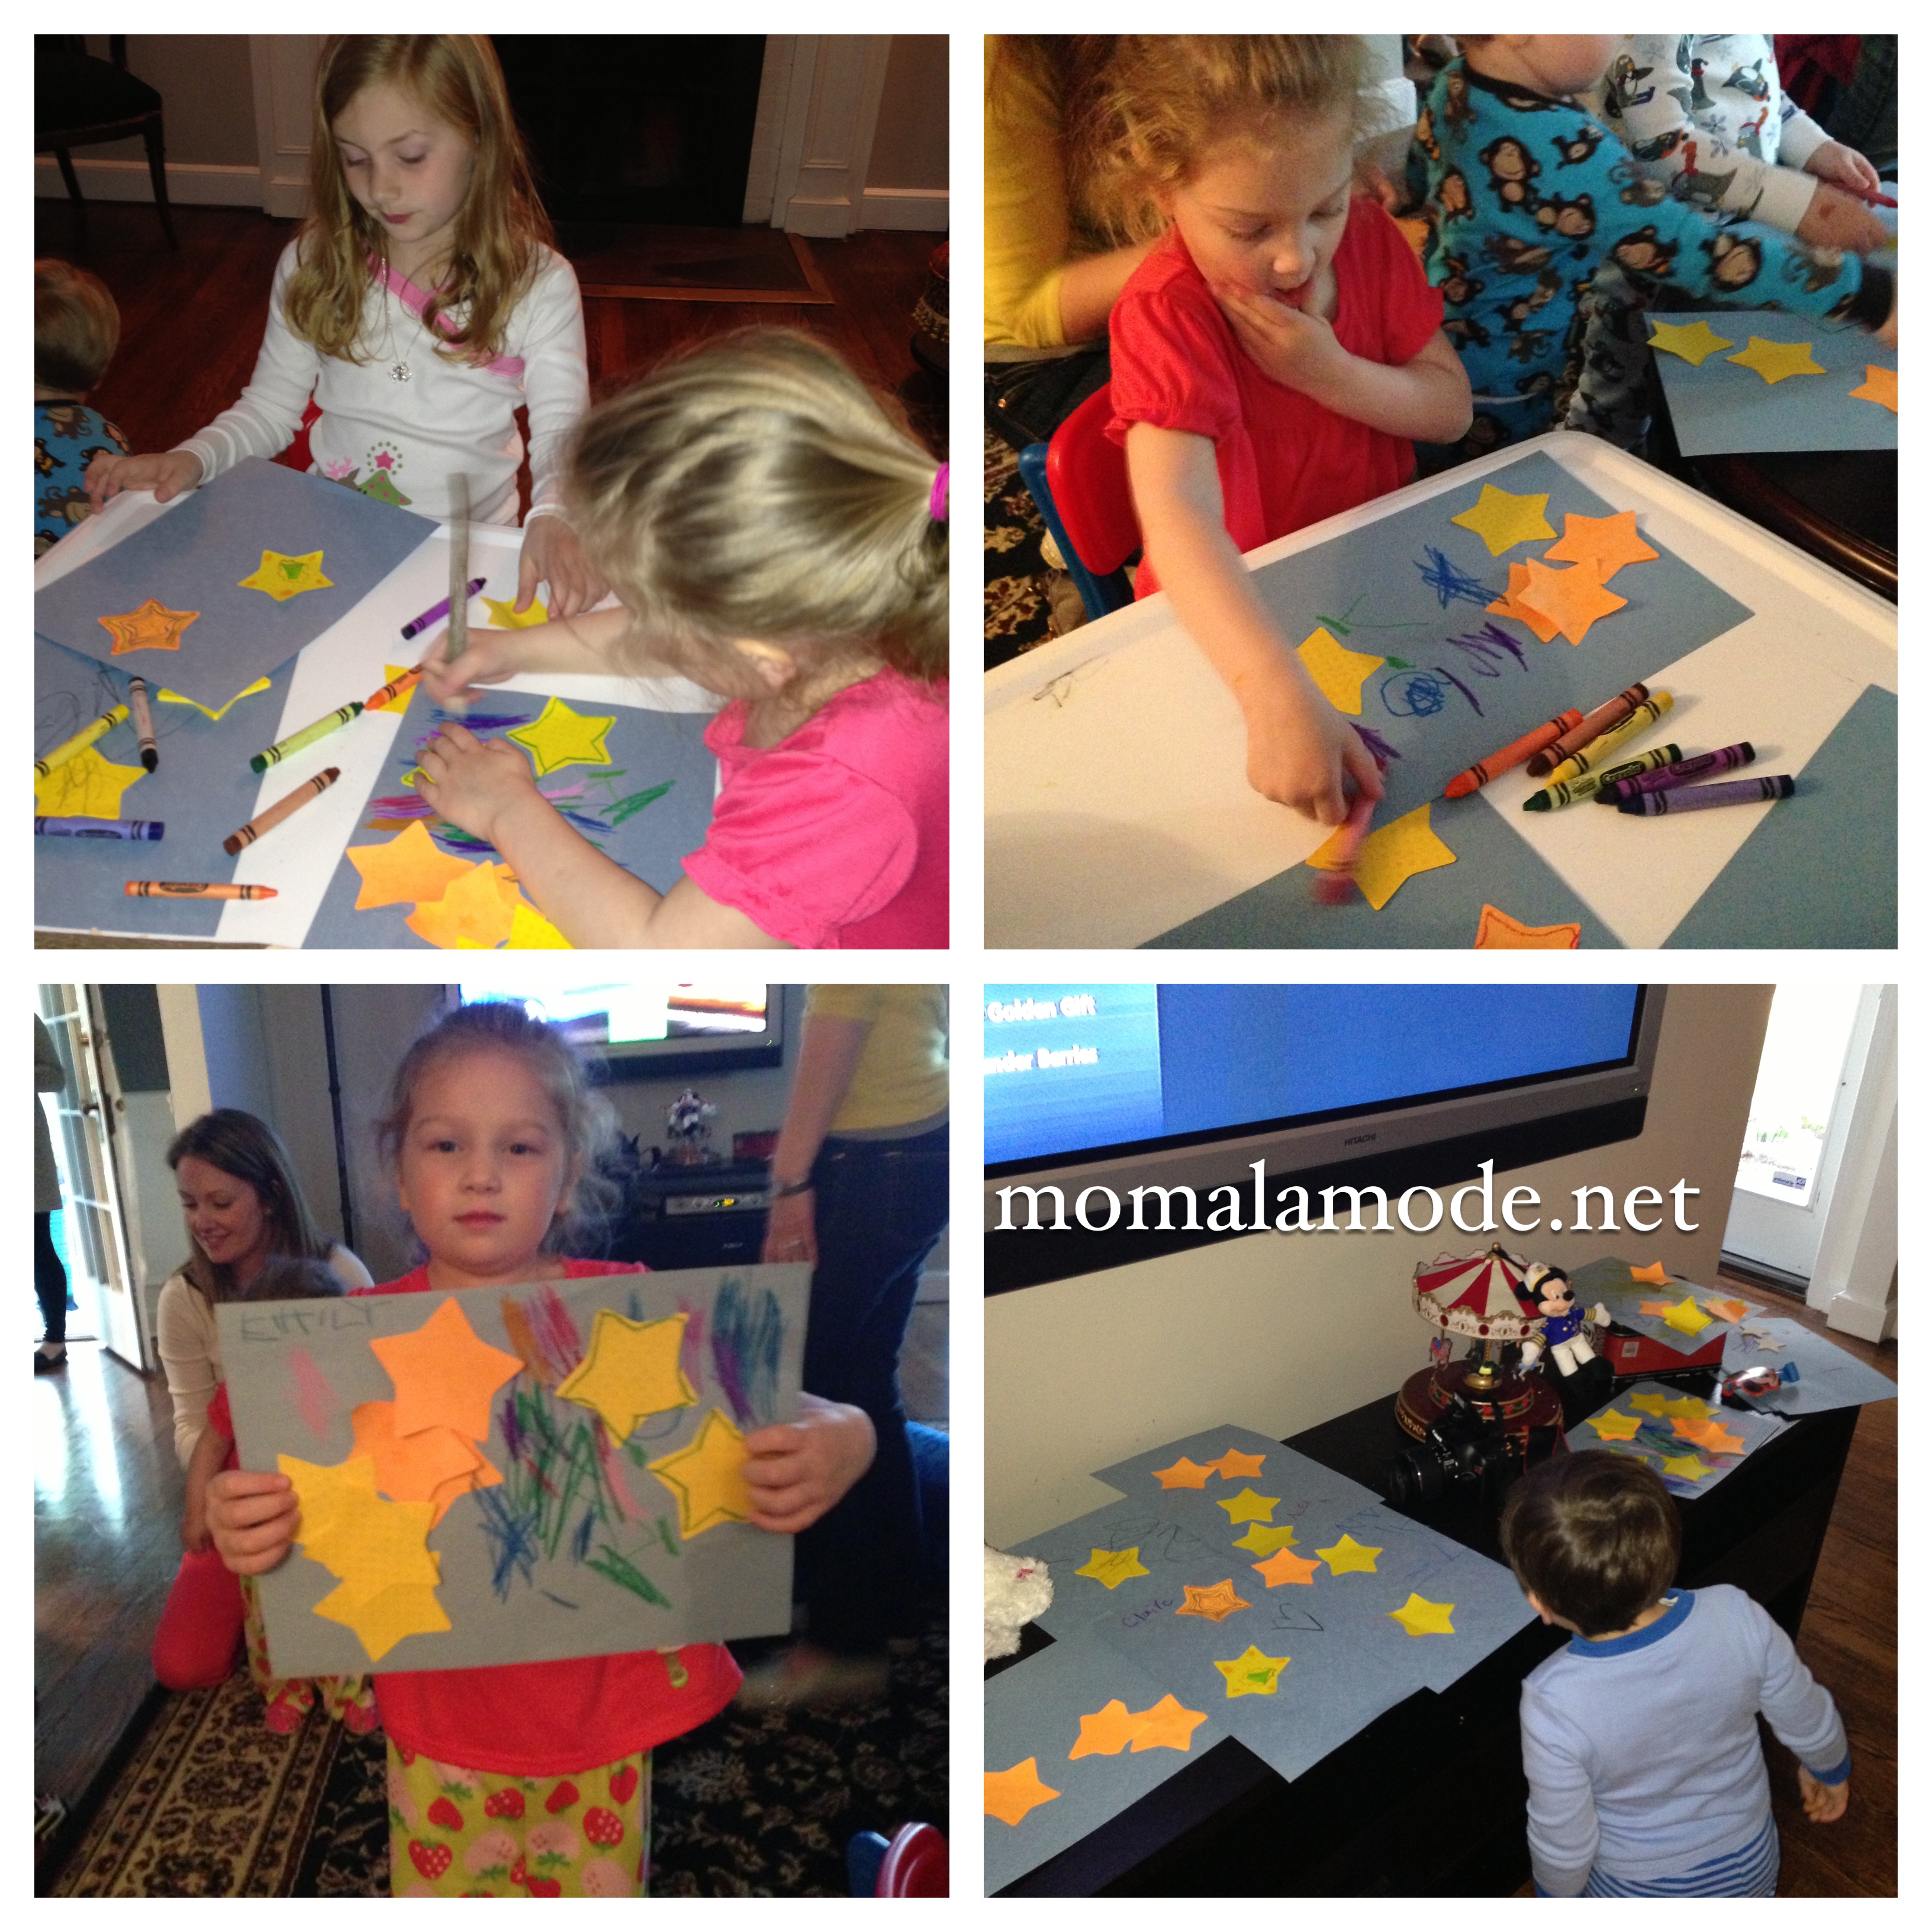 How adorable are these kiddies and their construction paper galaxies?!